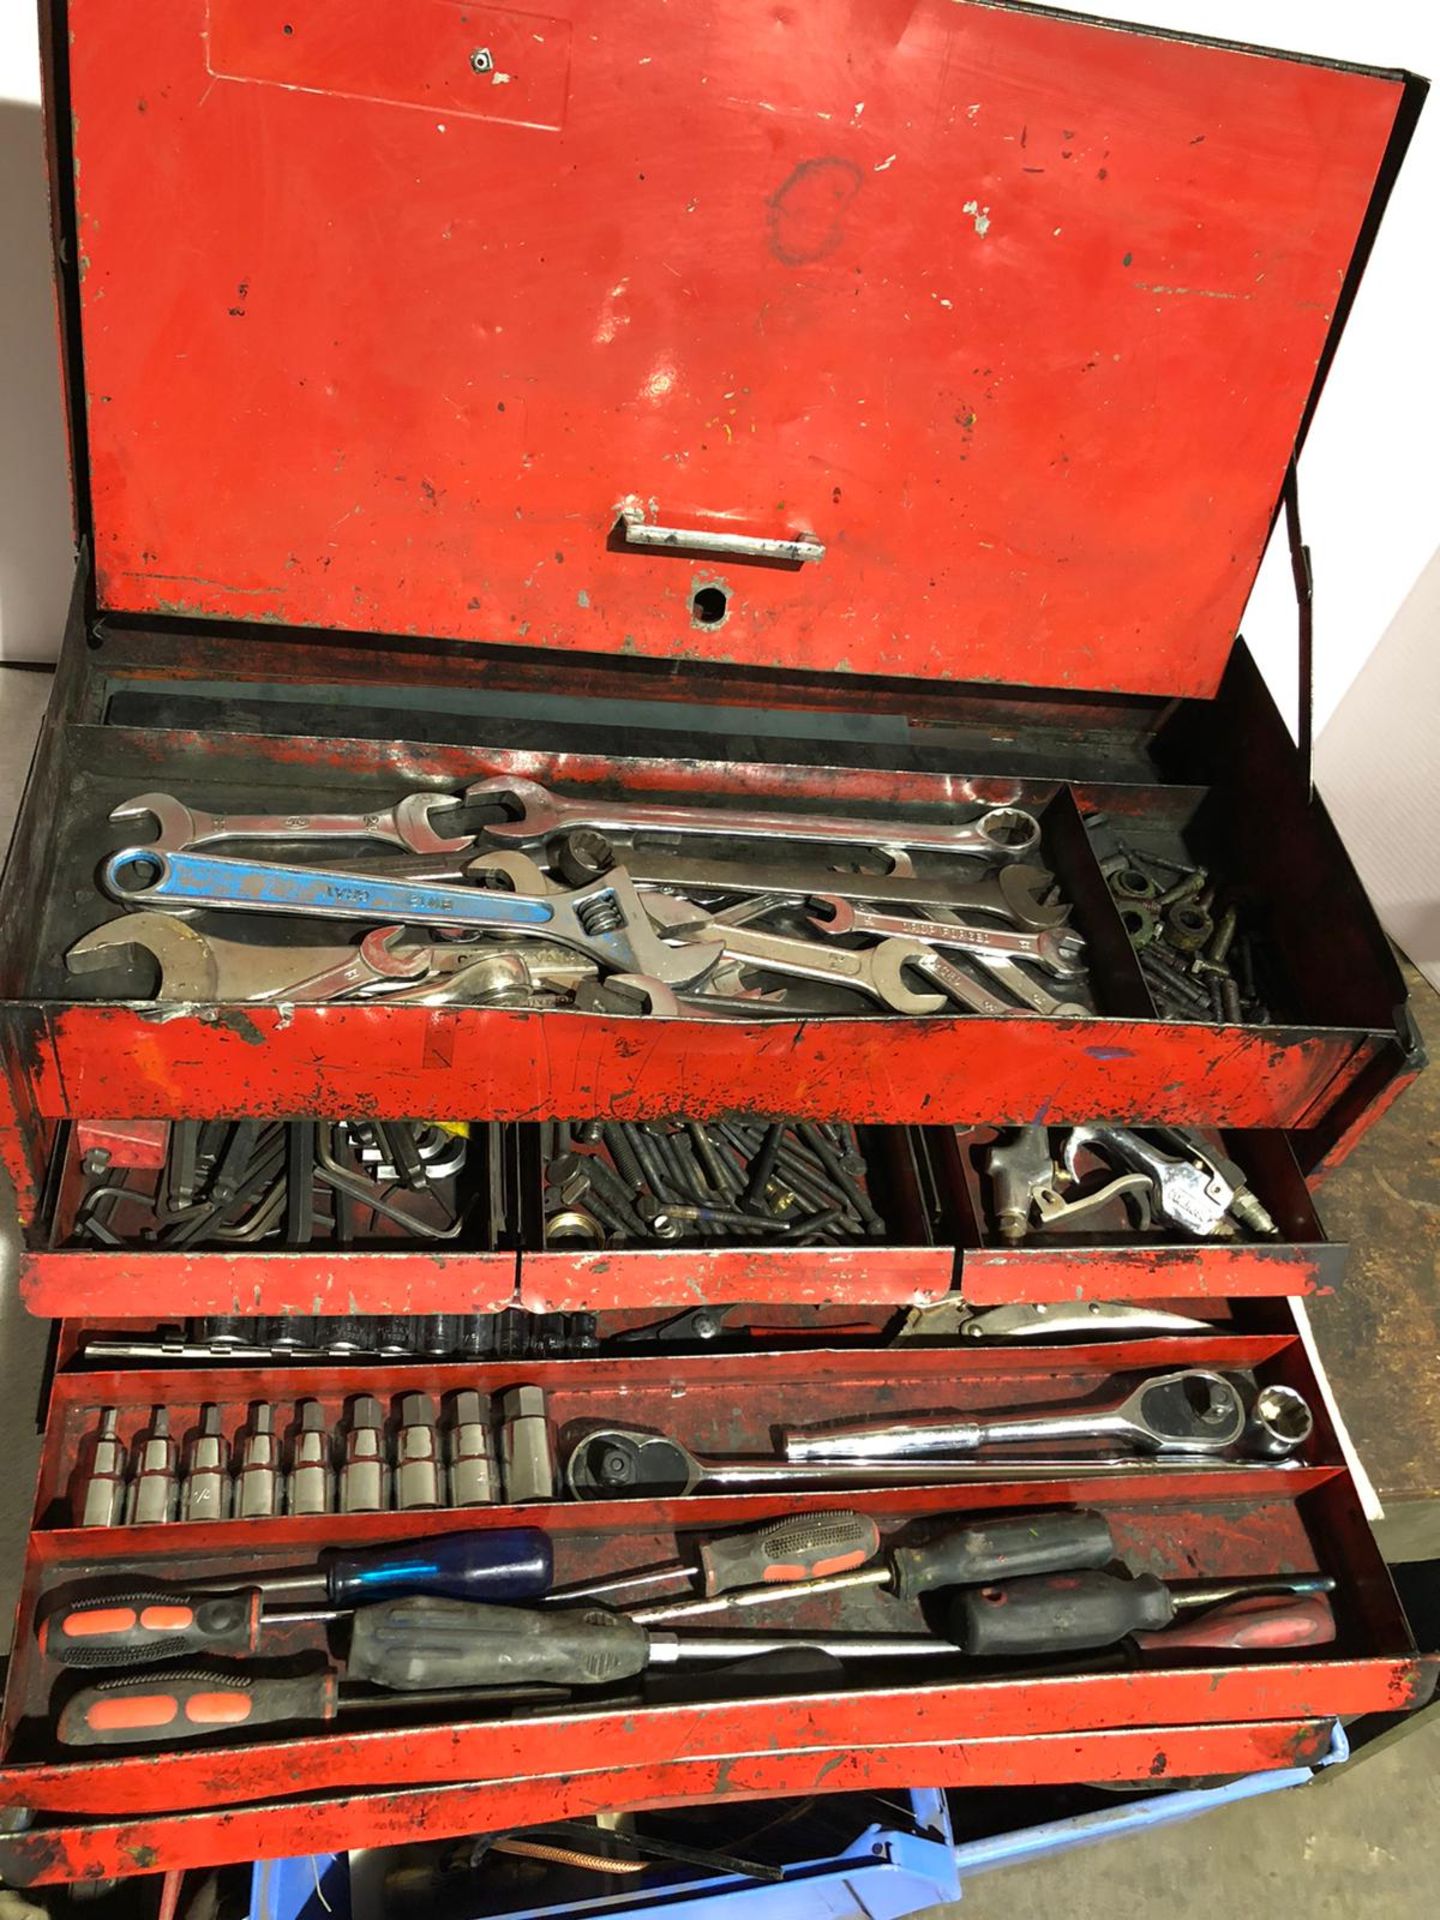 Heavy Duty Toolbox Complete with Tools including wrenches, screwdrivers, allen keys, sockets and - Image 2 of 5